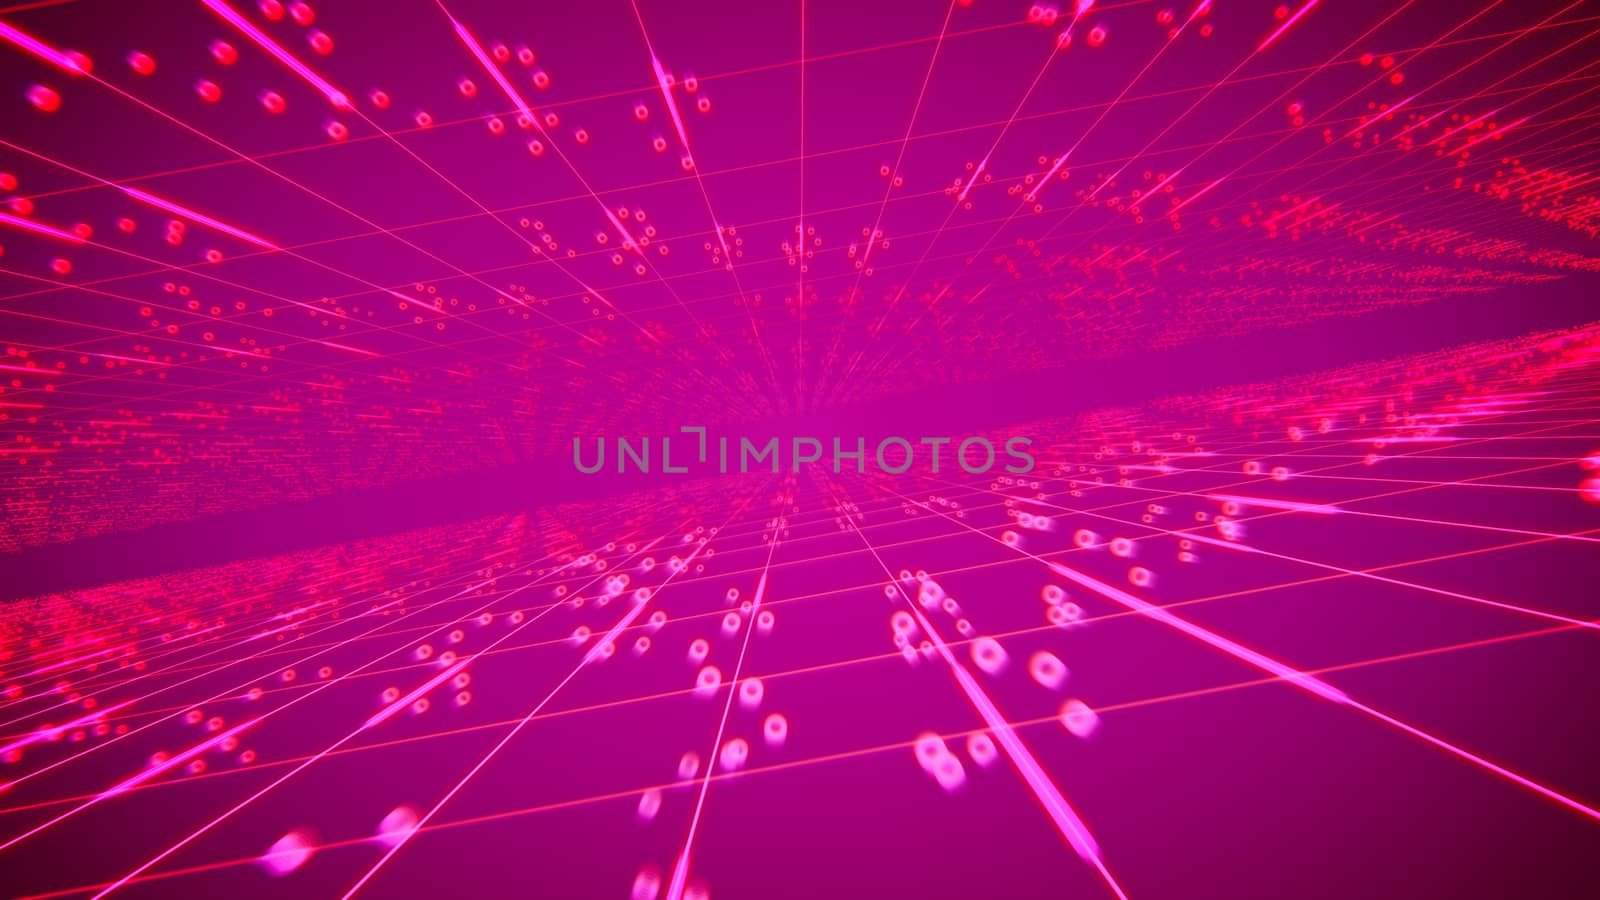 Imposing 3d illustration of time tube from two leaning surfaces covered with square rosy nets and flying spots in the dark pink background. It creates the cheery and futuristic mood.